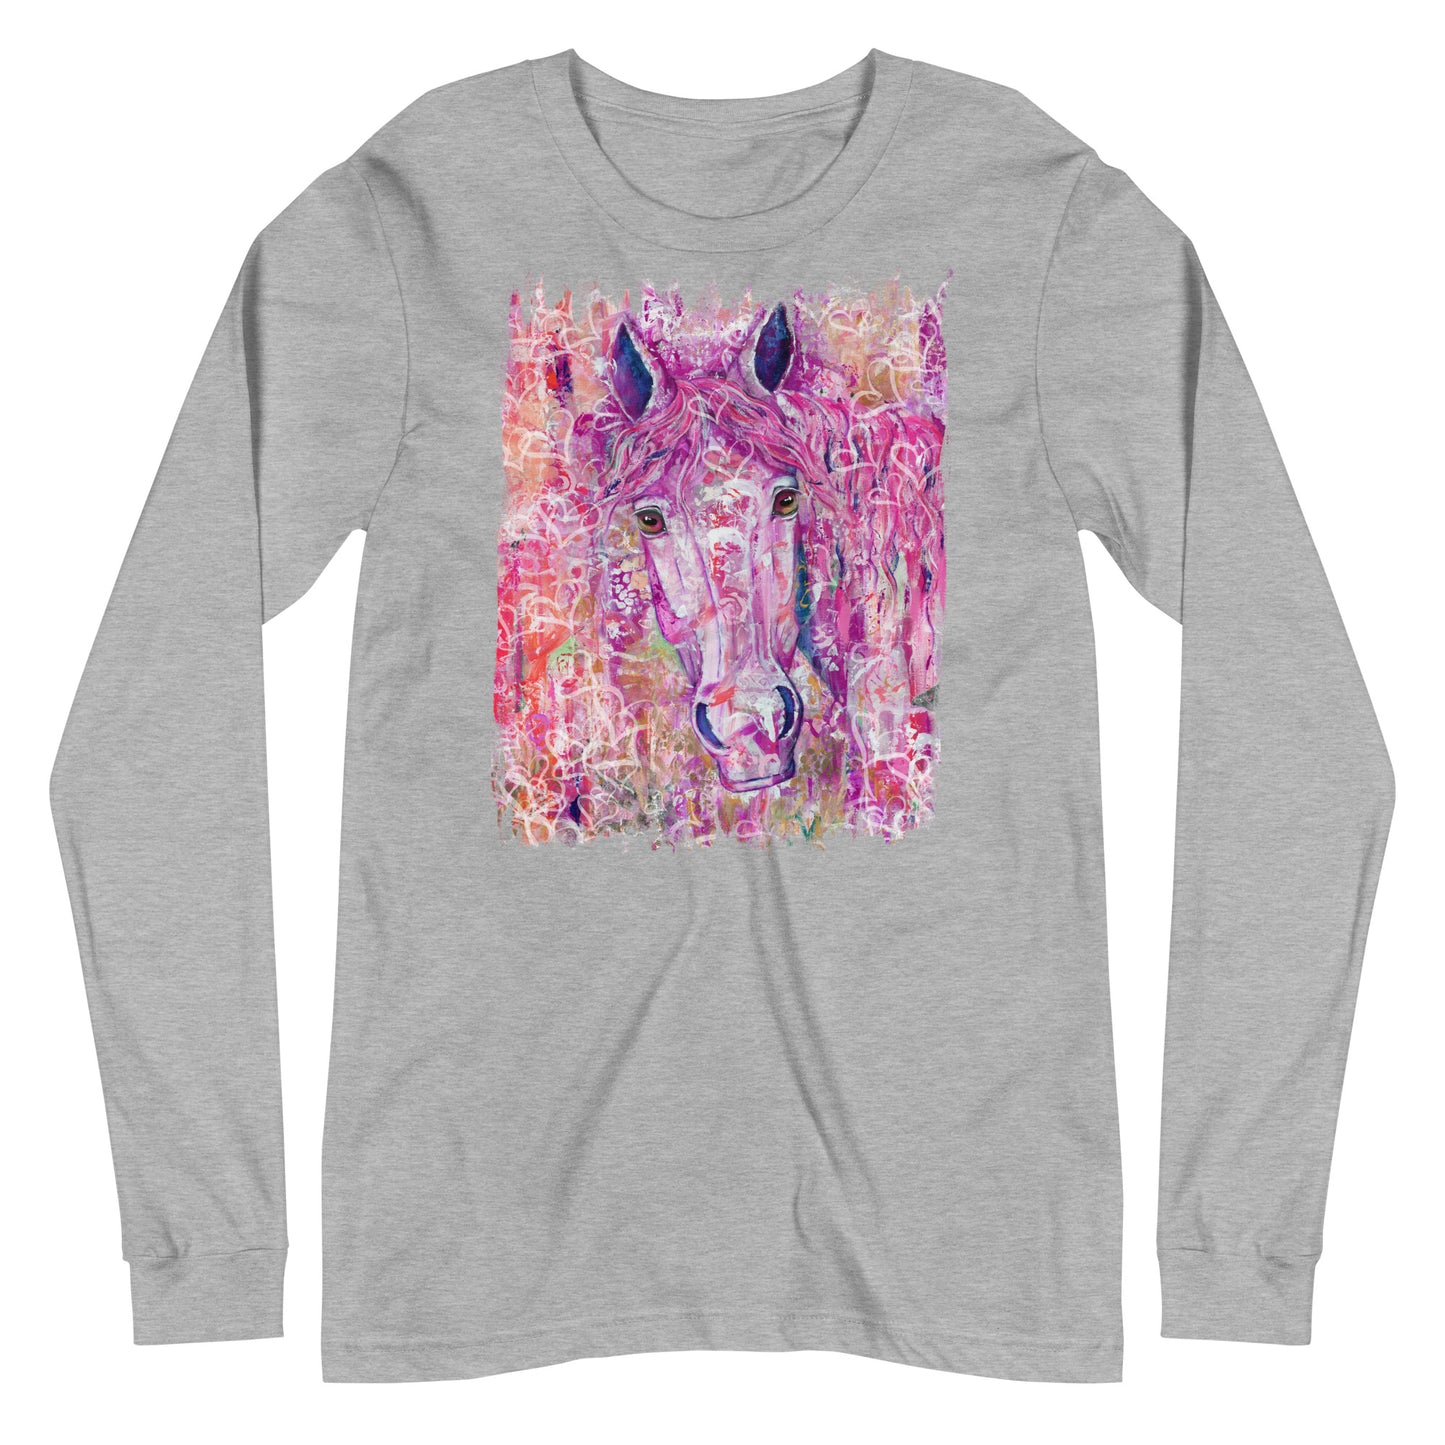 "Pink Kind Heart with Hearts" Horse Pony Prints Unisex Long Sleeve Tee